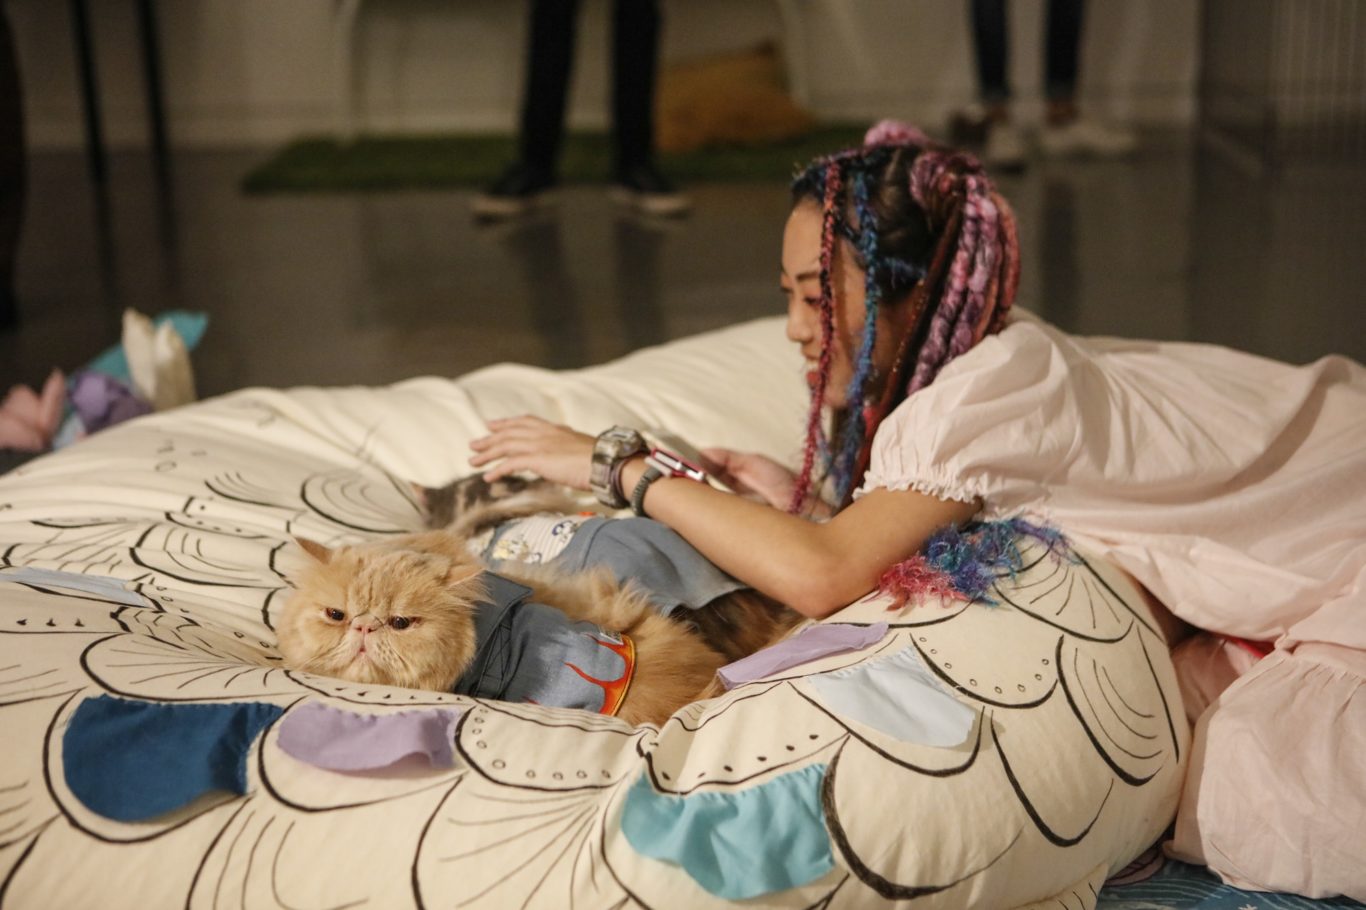 Artist Kelly Limerick spends time with feline friends in the gallery (Wellness/PA)